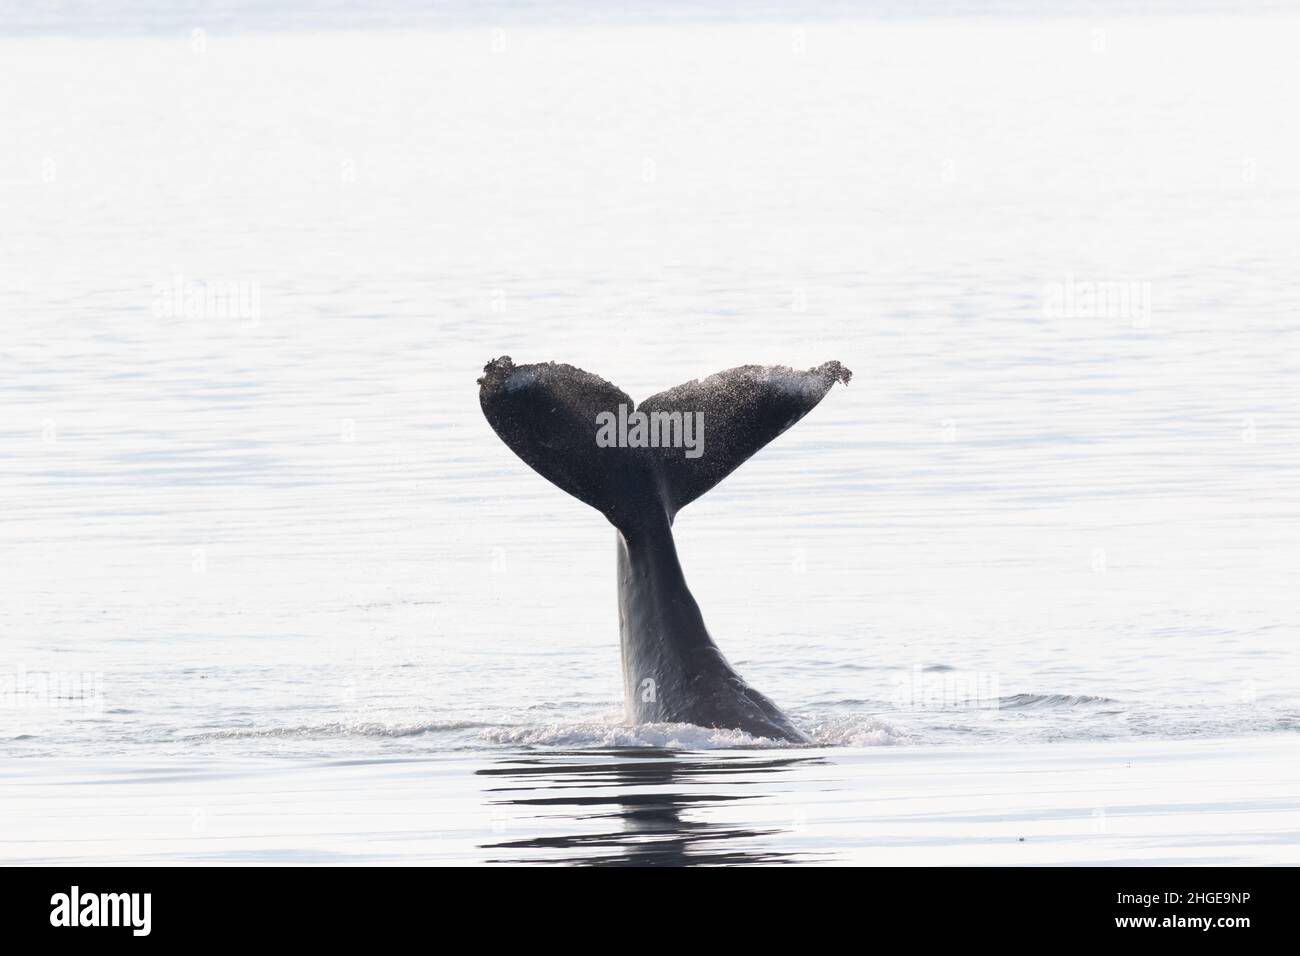 A playful humpback whale in Alaska's chilly waters raises and lowers its huge, fluked tail fi in a playful manner Stock Photo